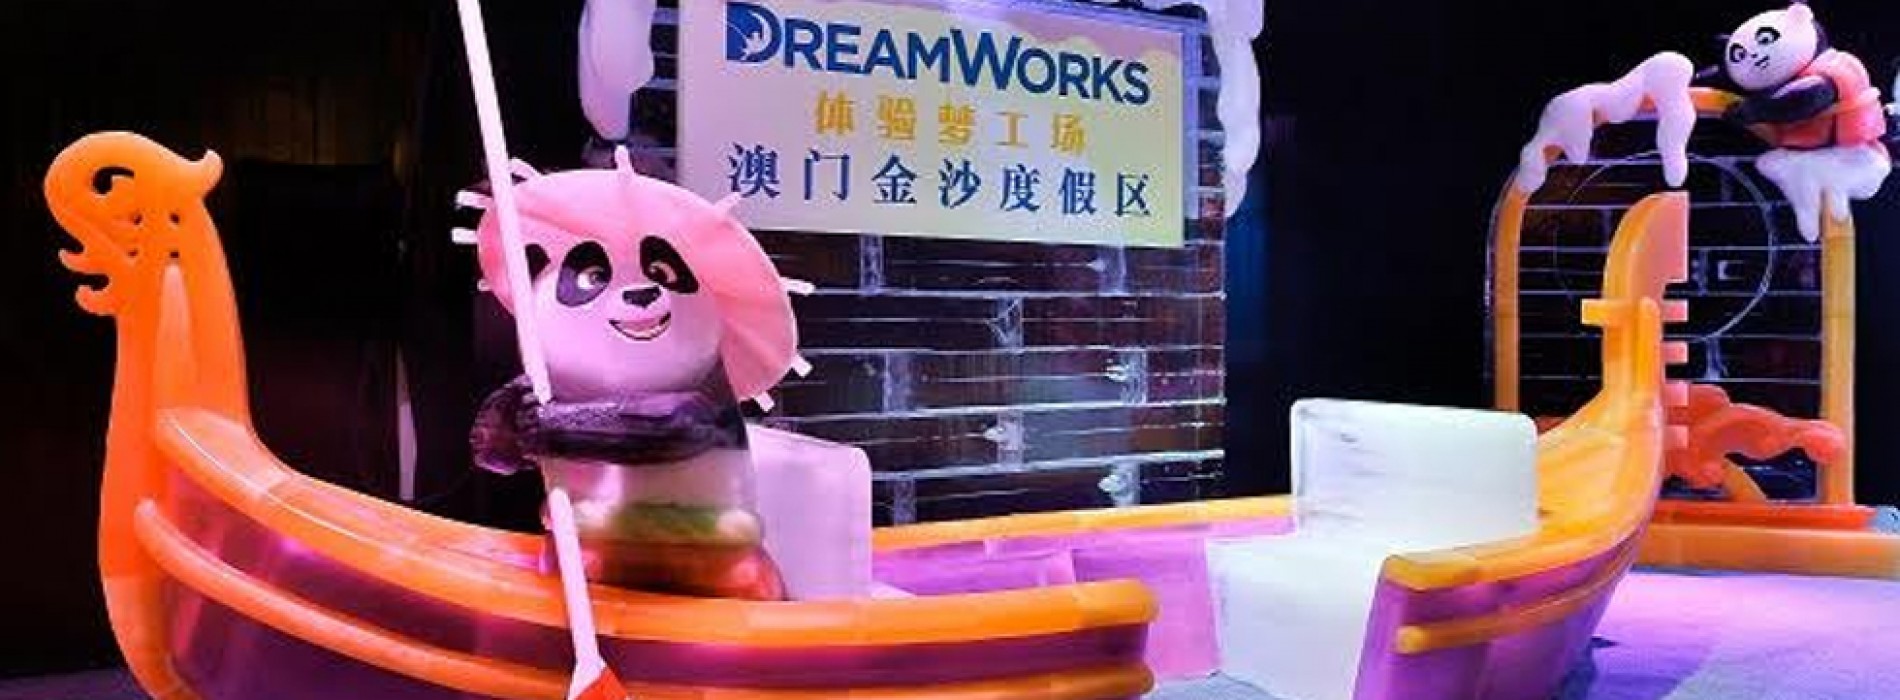 Kung Fu Panda Adventure Ice World with the DreamWorks All-Stars opens at The Venetian Macao